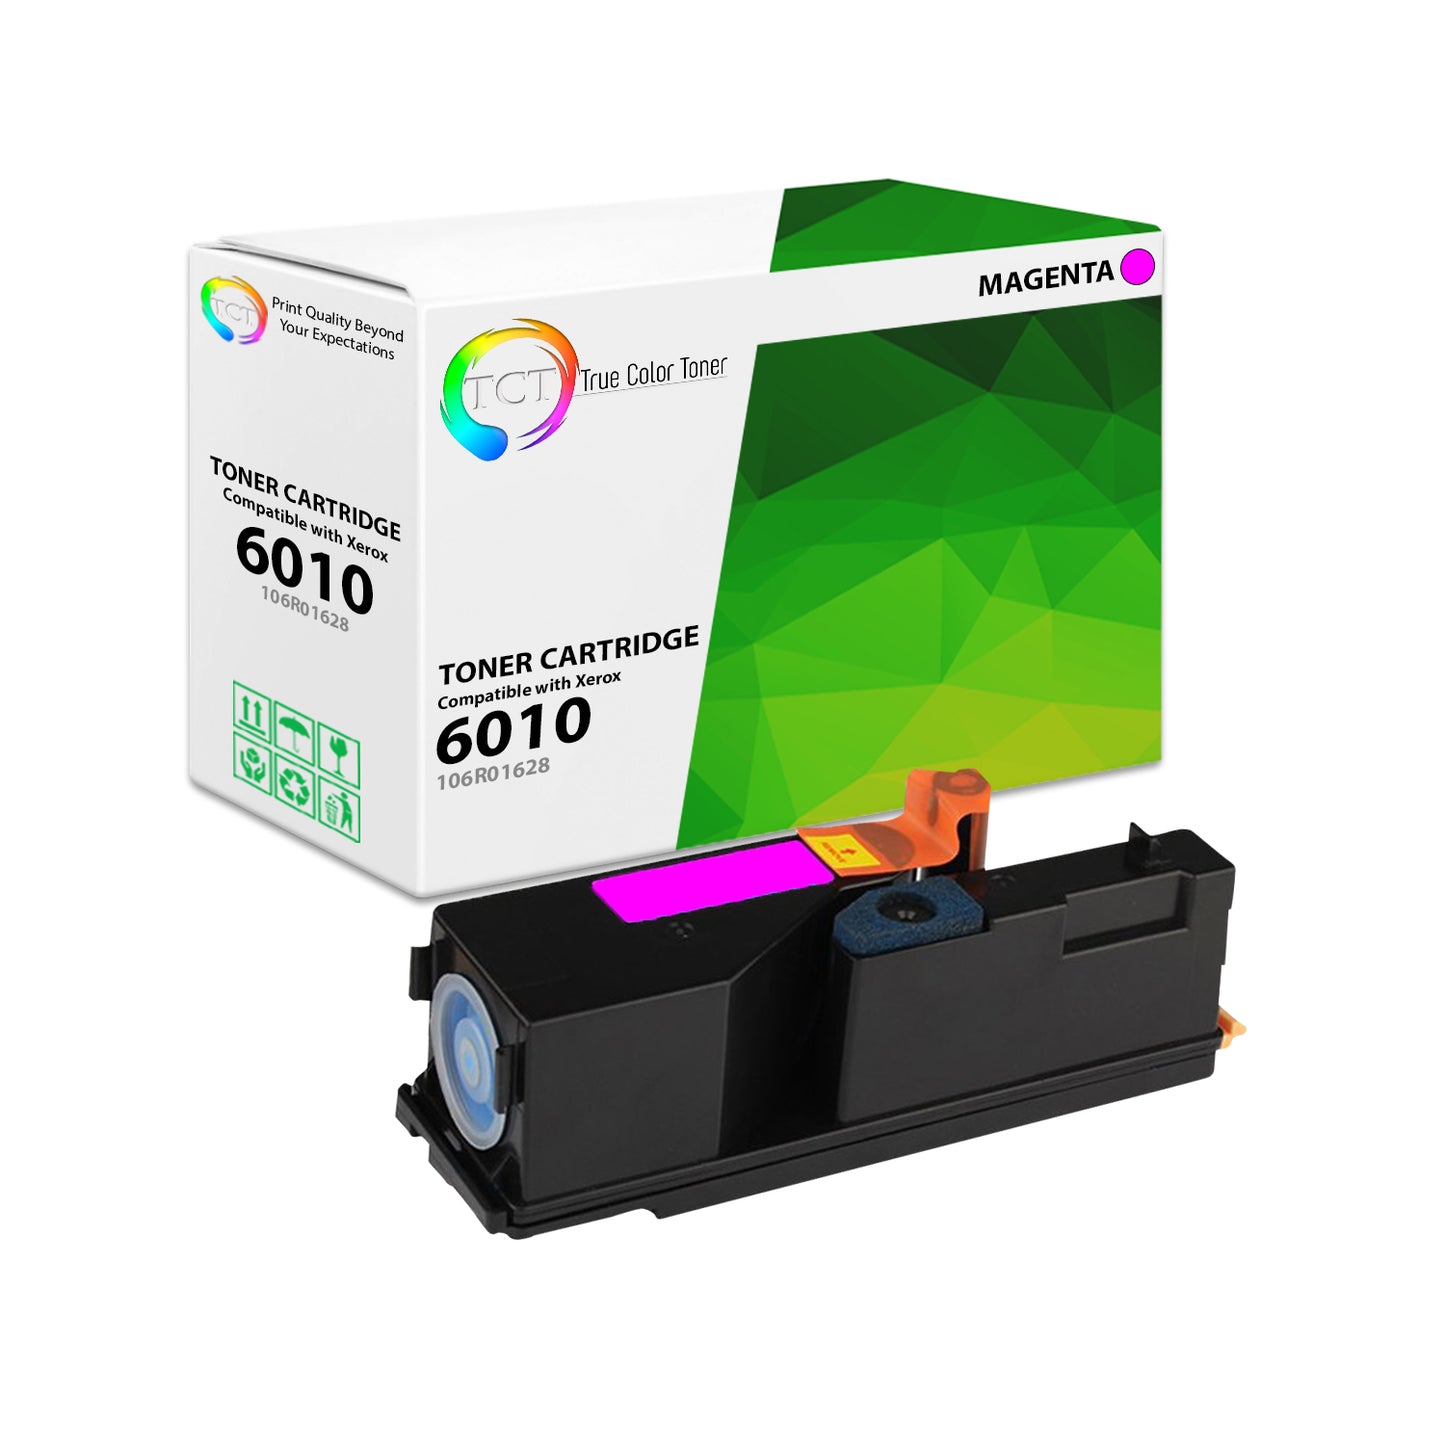 TCT Compatible Toner Cartridge Replacement for the Xerox 6010 Series - 1 Pack Magenta